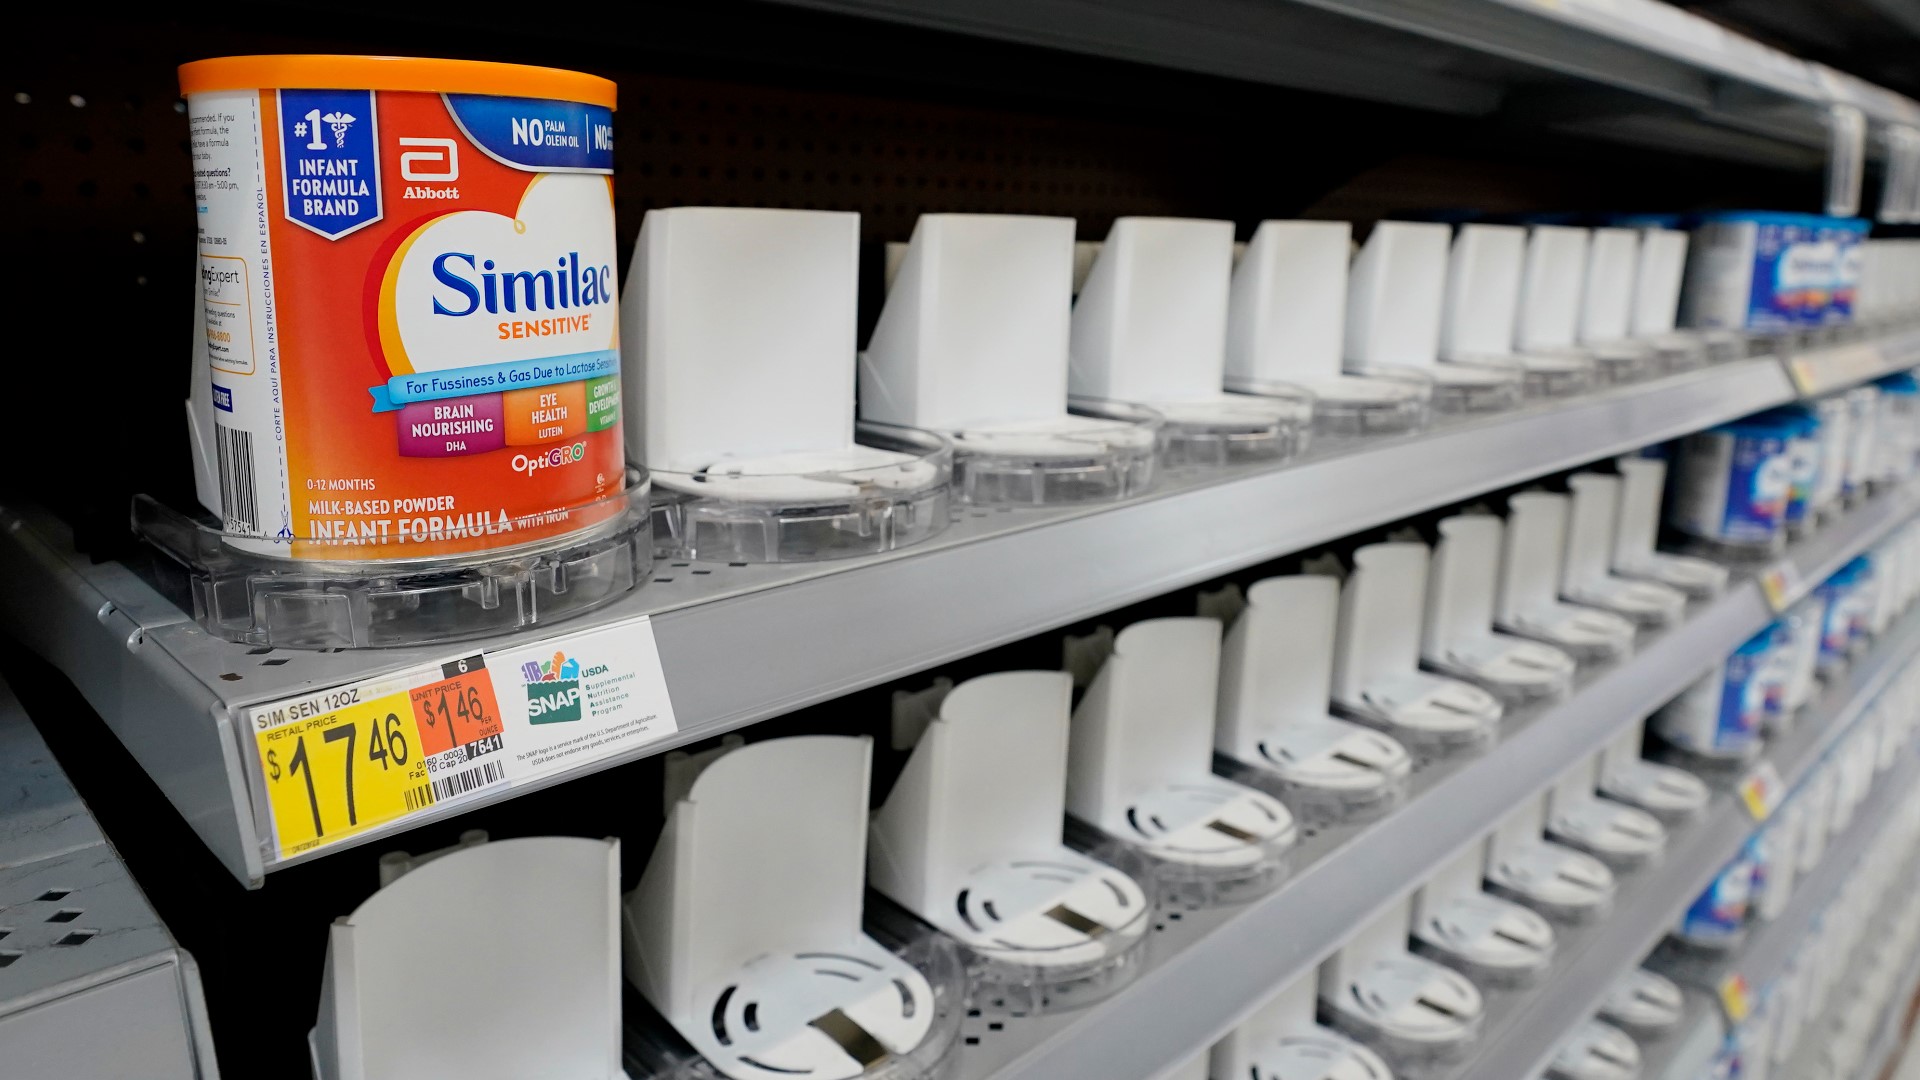 The baby formula shortage stems from supply chain disruptions and a safety recall by formula maker Abbott stemming from contamination concerns.